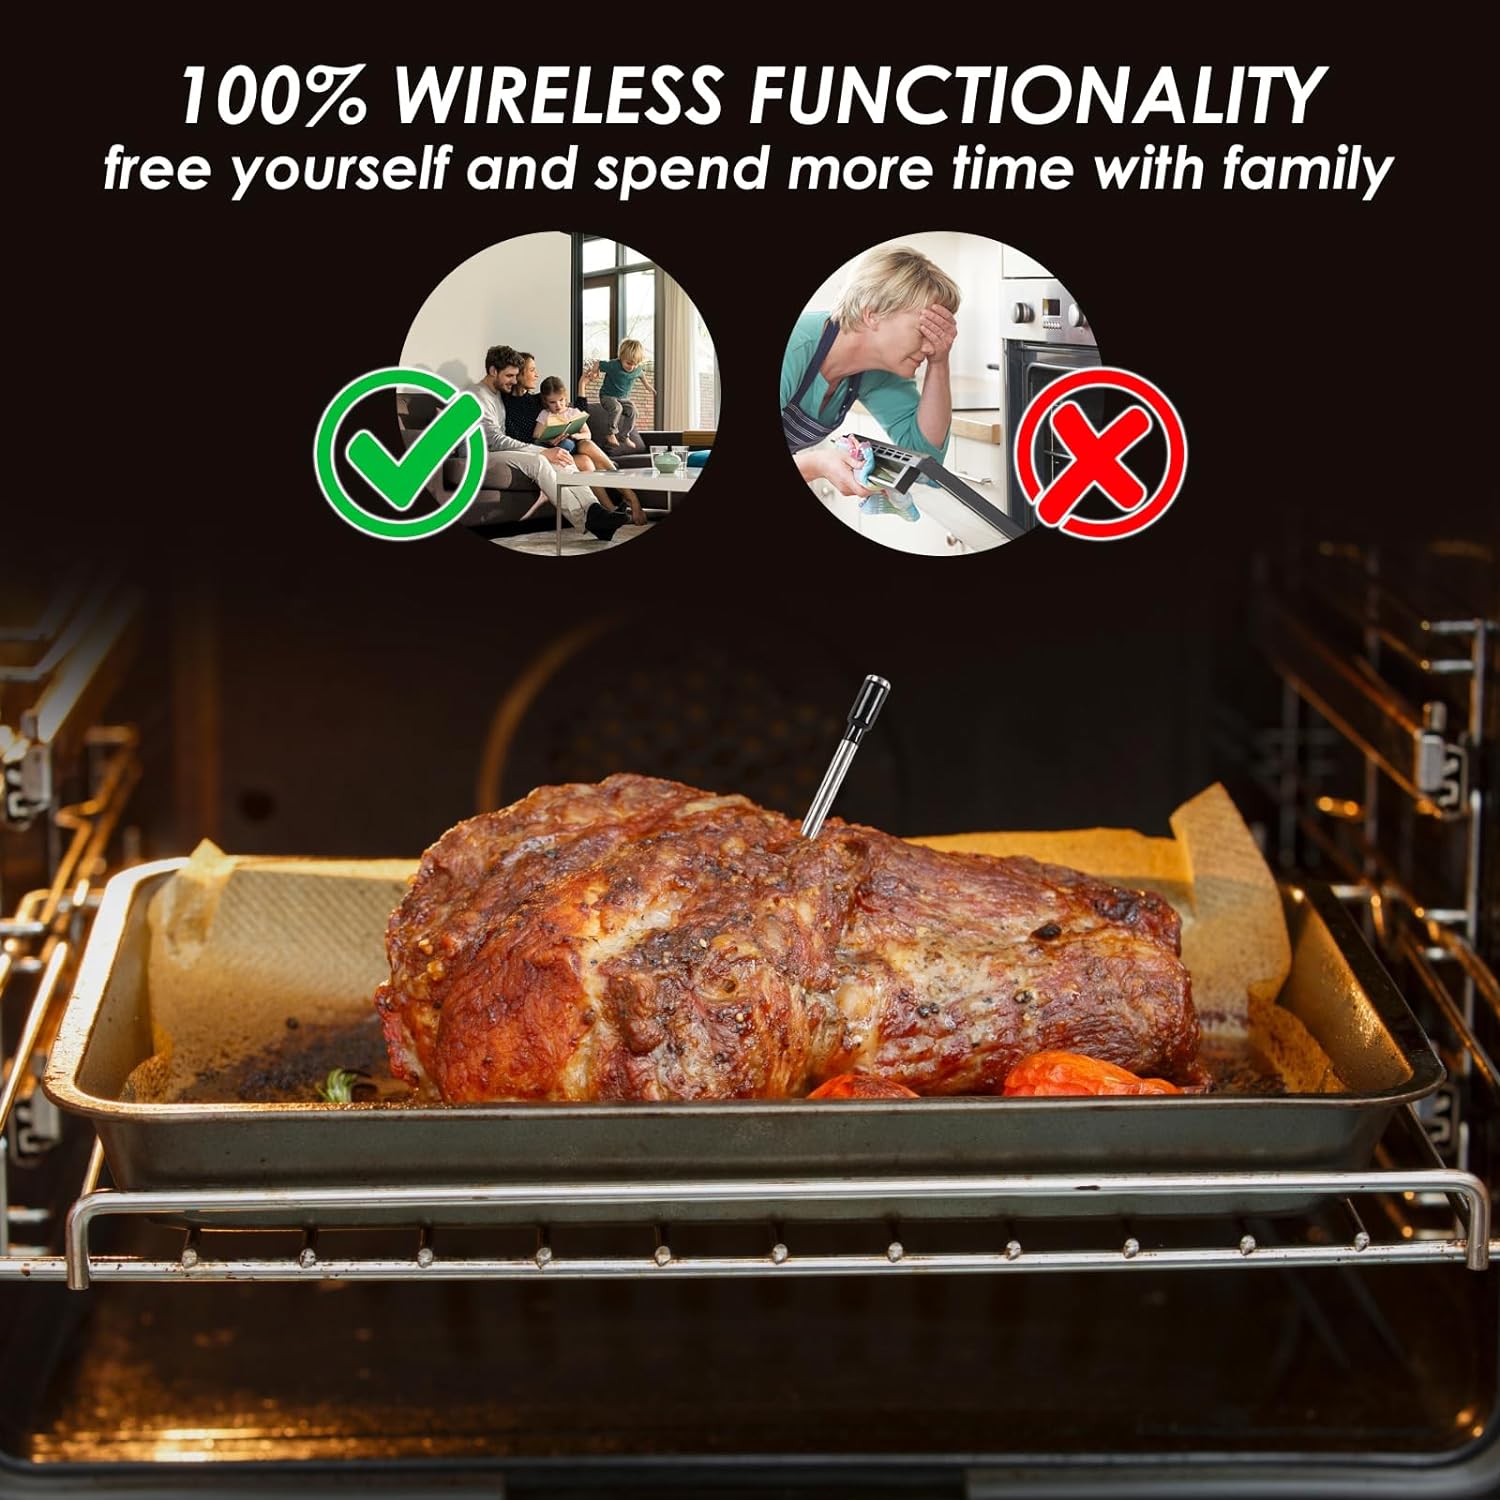 Bluetooth Wireless Meat Thermometer Grill BBQ Thermometer with iOS  Android App, Alarm, 500FT Digital Cooking Thermometer for Remote Monitoring of BBQ, Oven, Grill, Kitchen, Smoker, Rotisserie